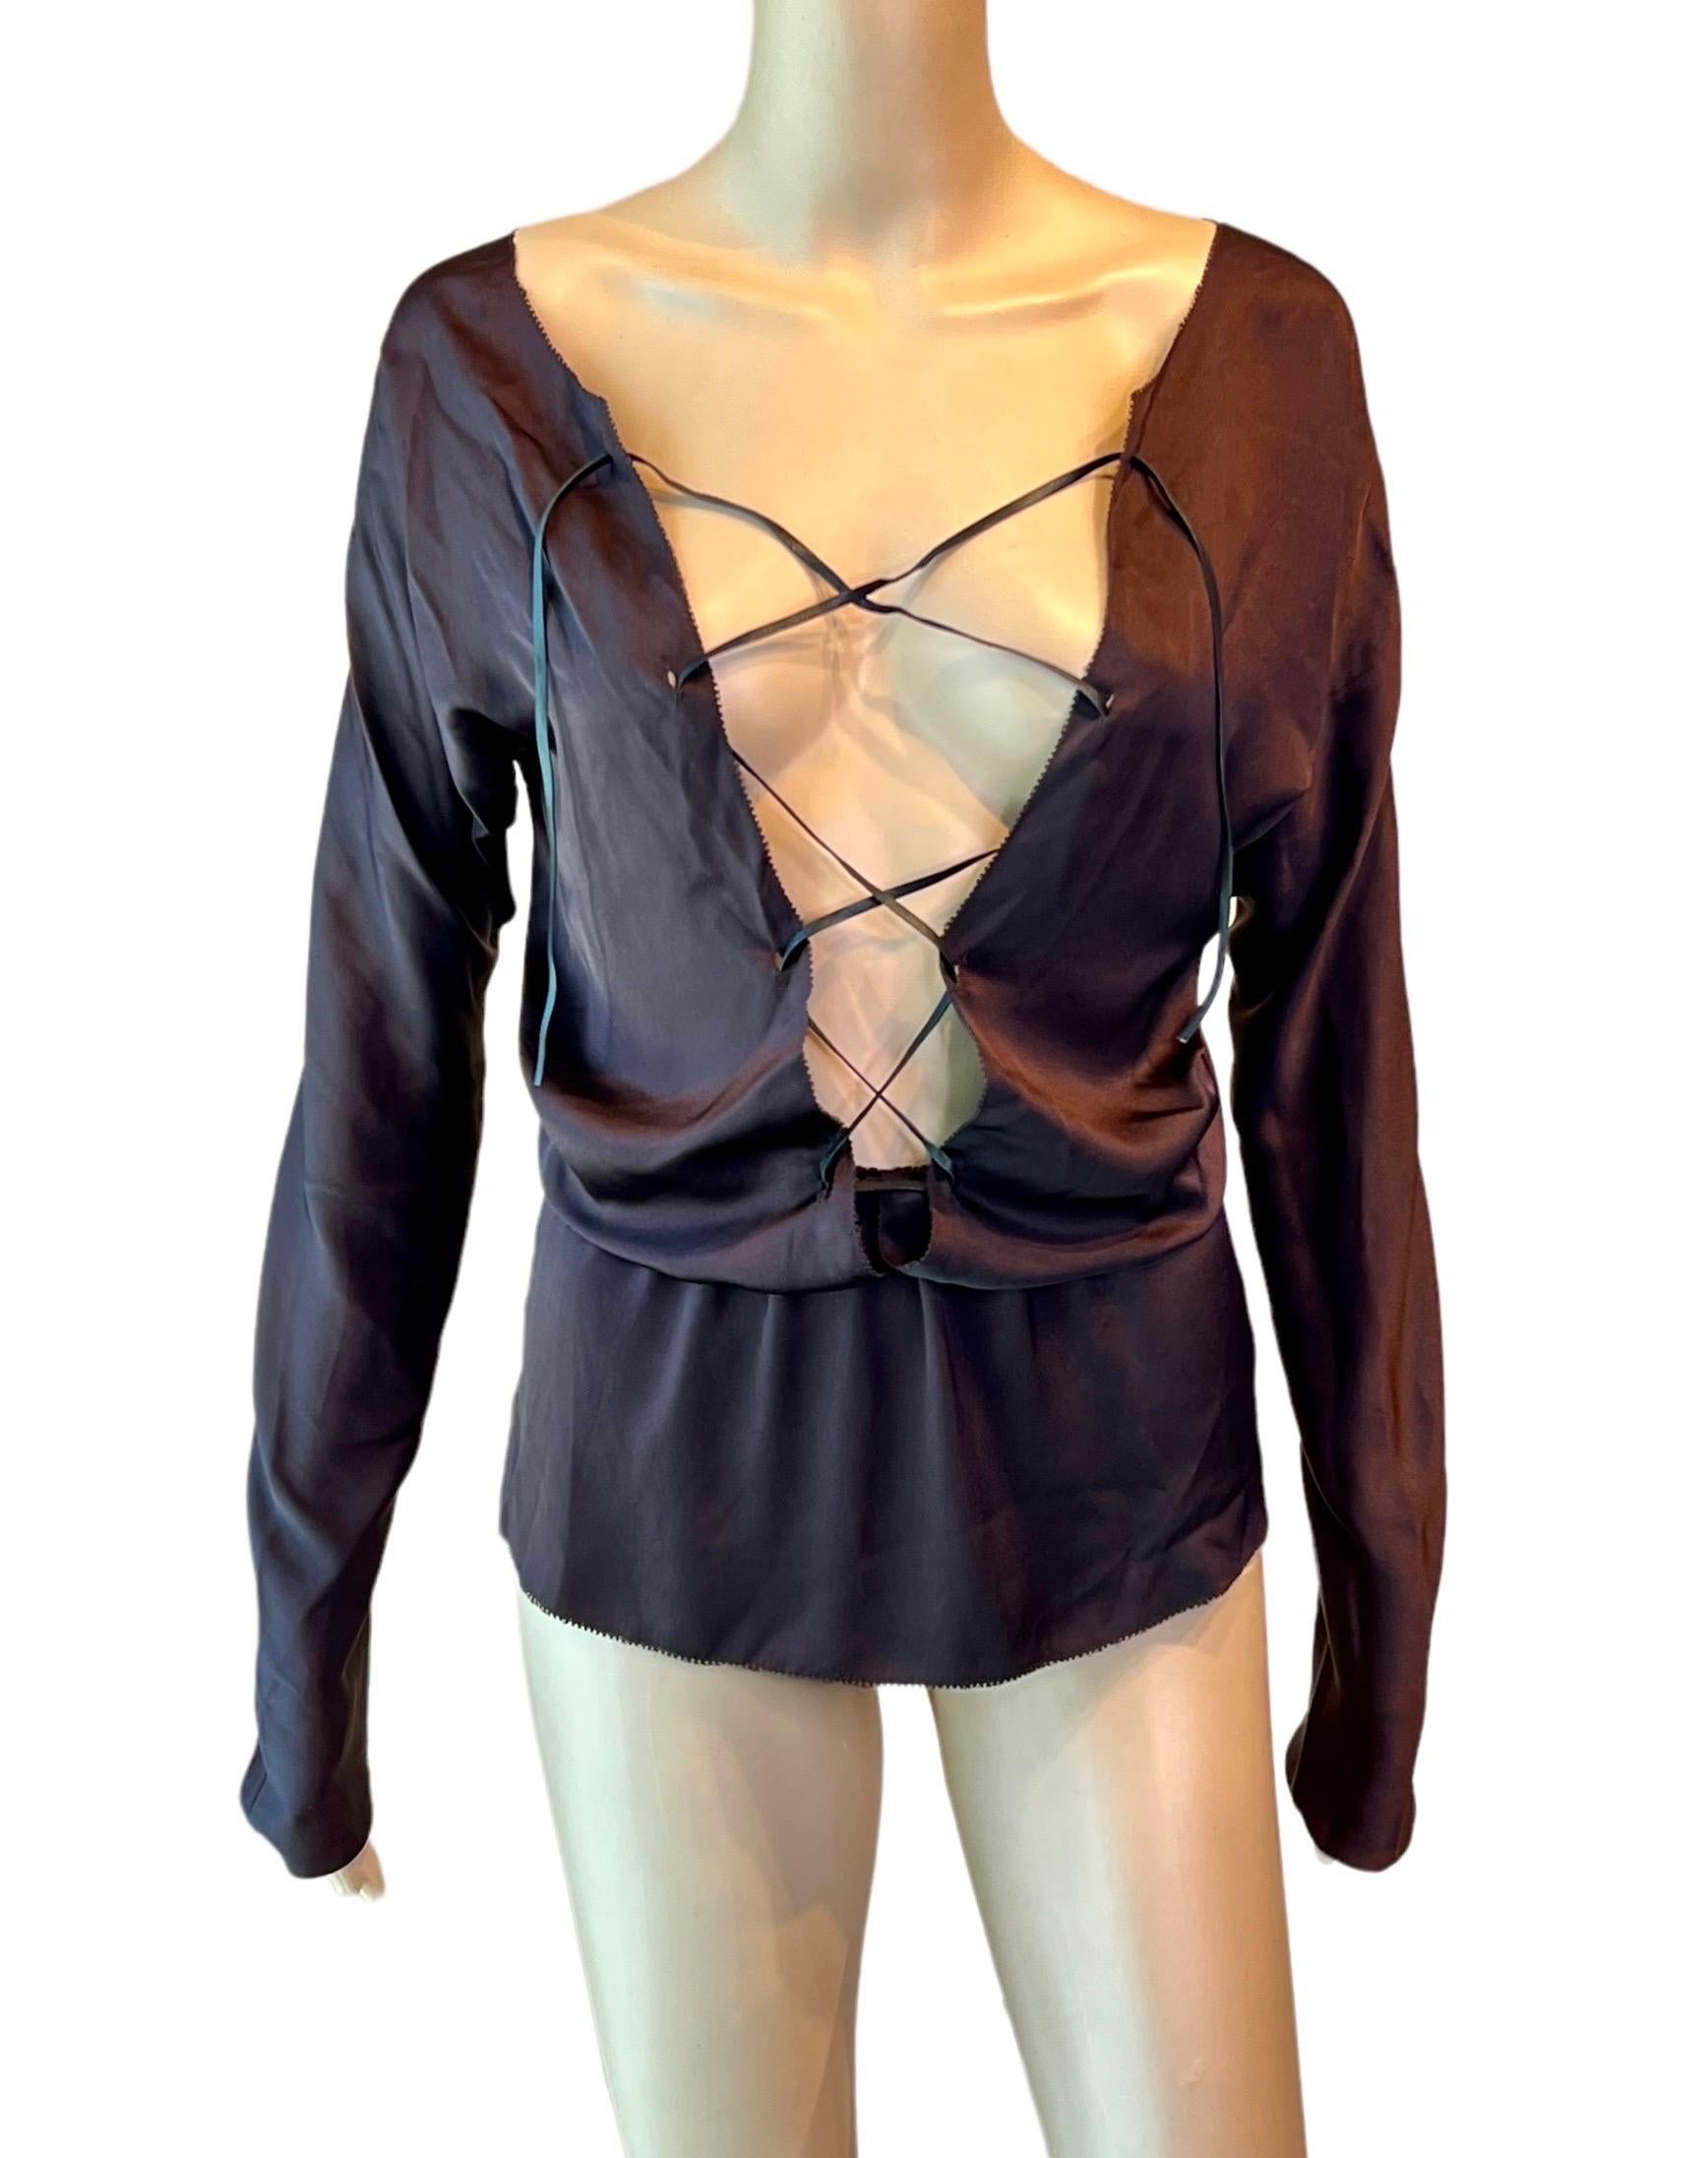 Tom Ford for Gucci F/W 2002 Runway Plunging Silk Lace-Up Brown Blouse Top IT 42

Gucci silk long sleeve brown blouse featuring plunging neckline, lace-up closure at bust, and cutout back.

